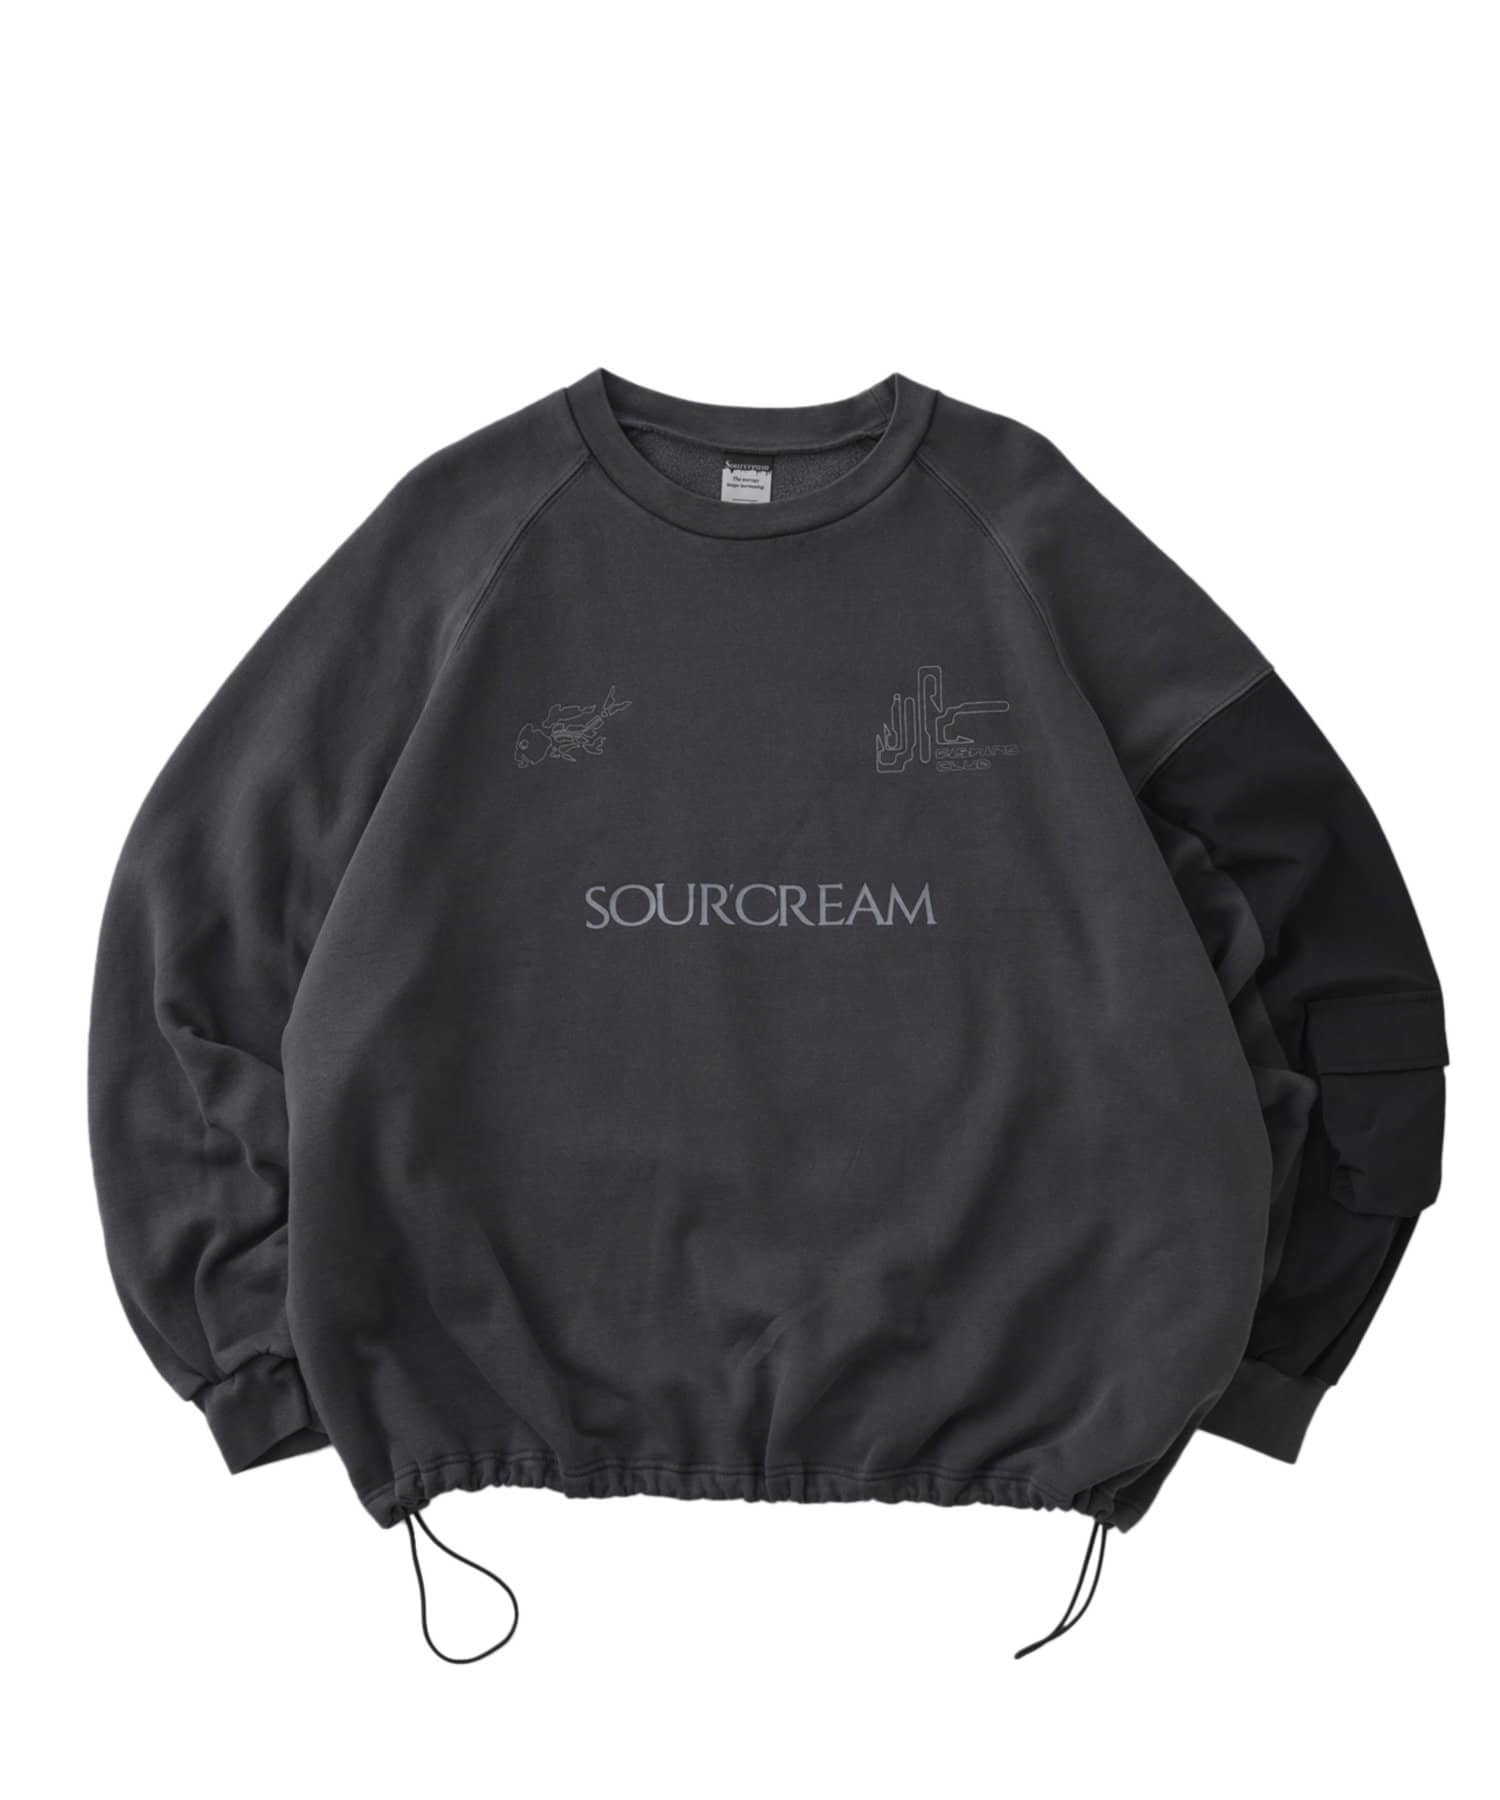 WHO’S WHO gallery(フーズフーギャラリー) 【Sourcream Fishing Club】TECH CREW SWT